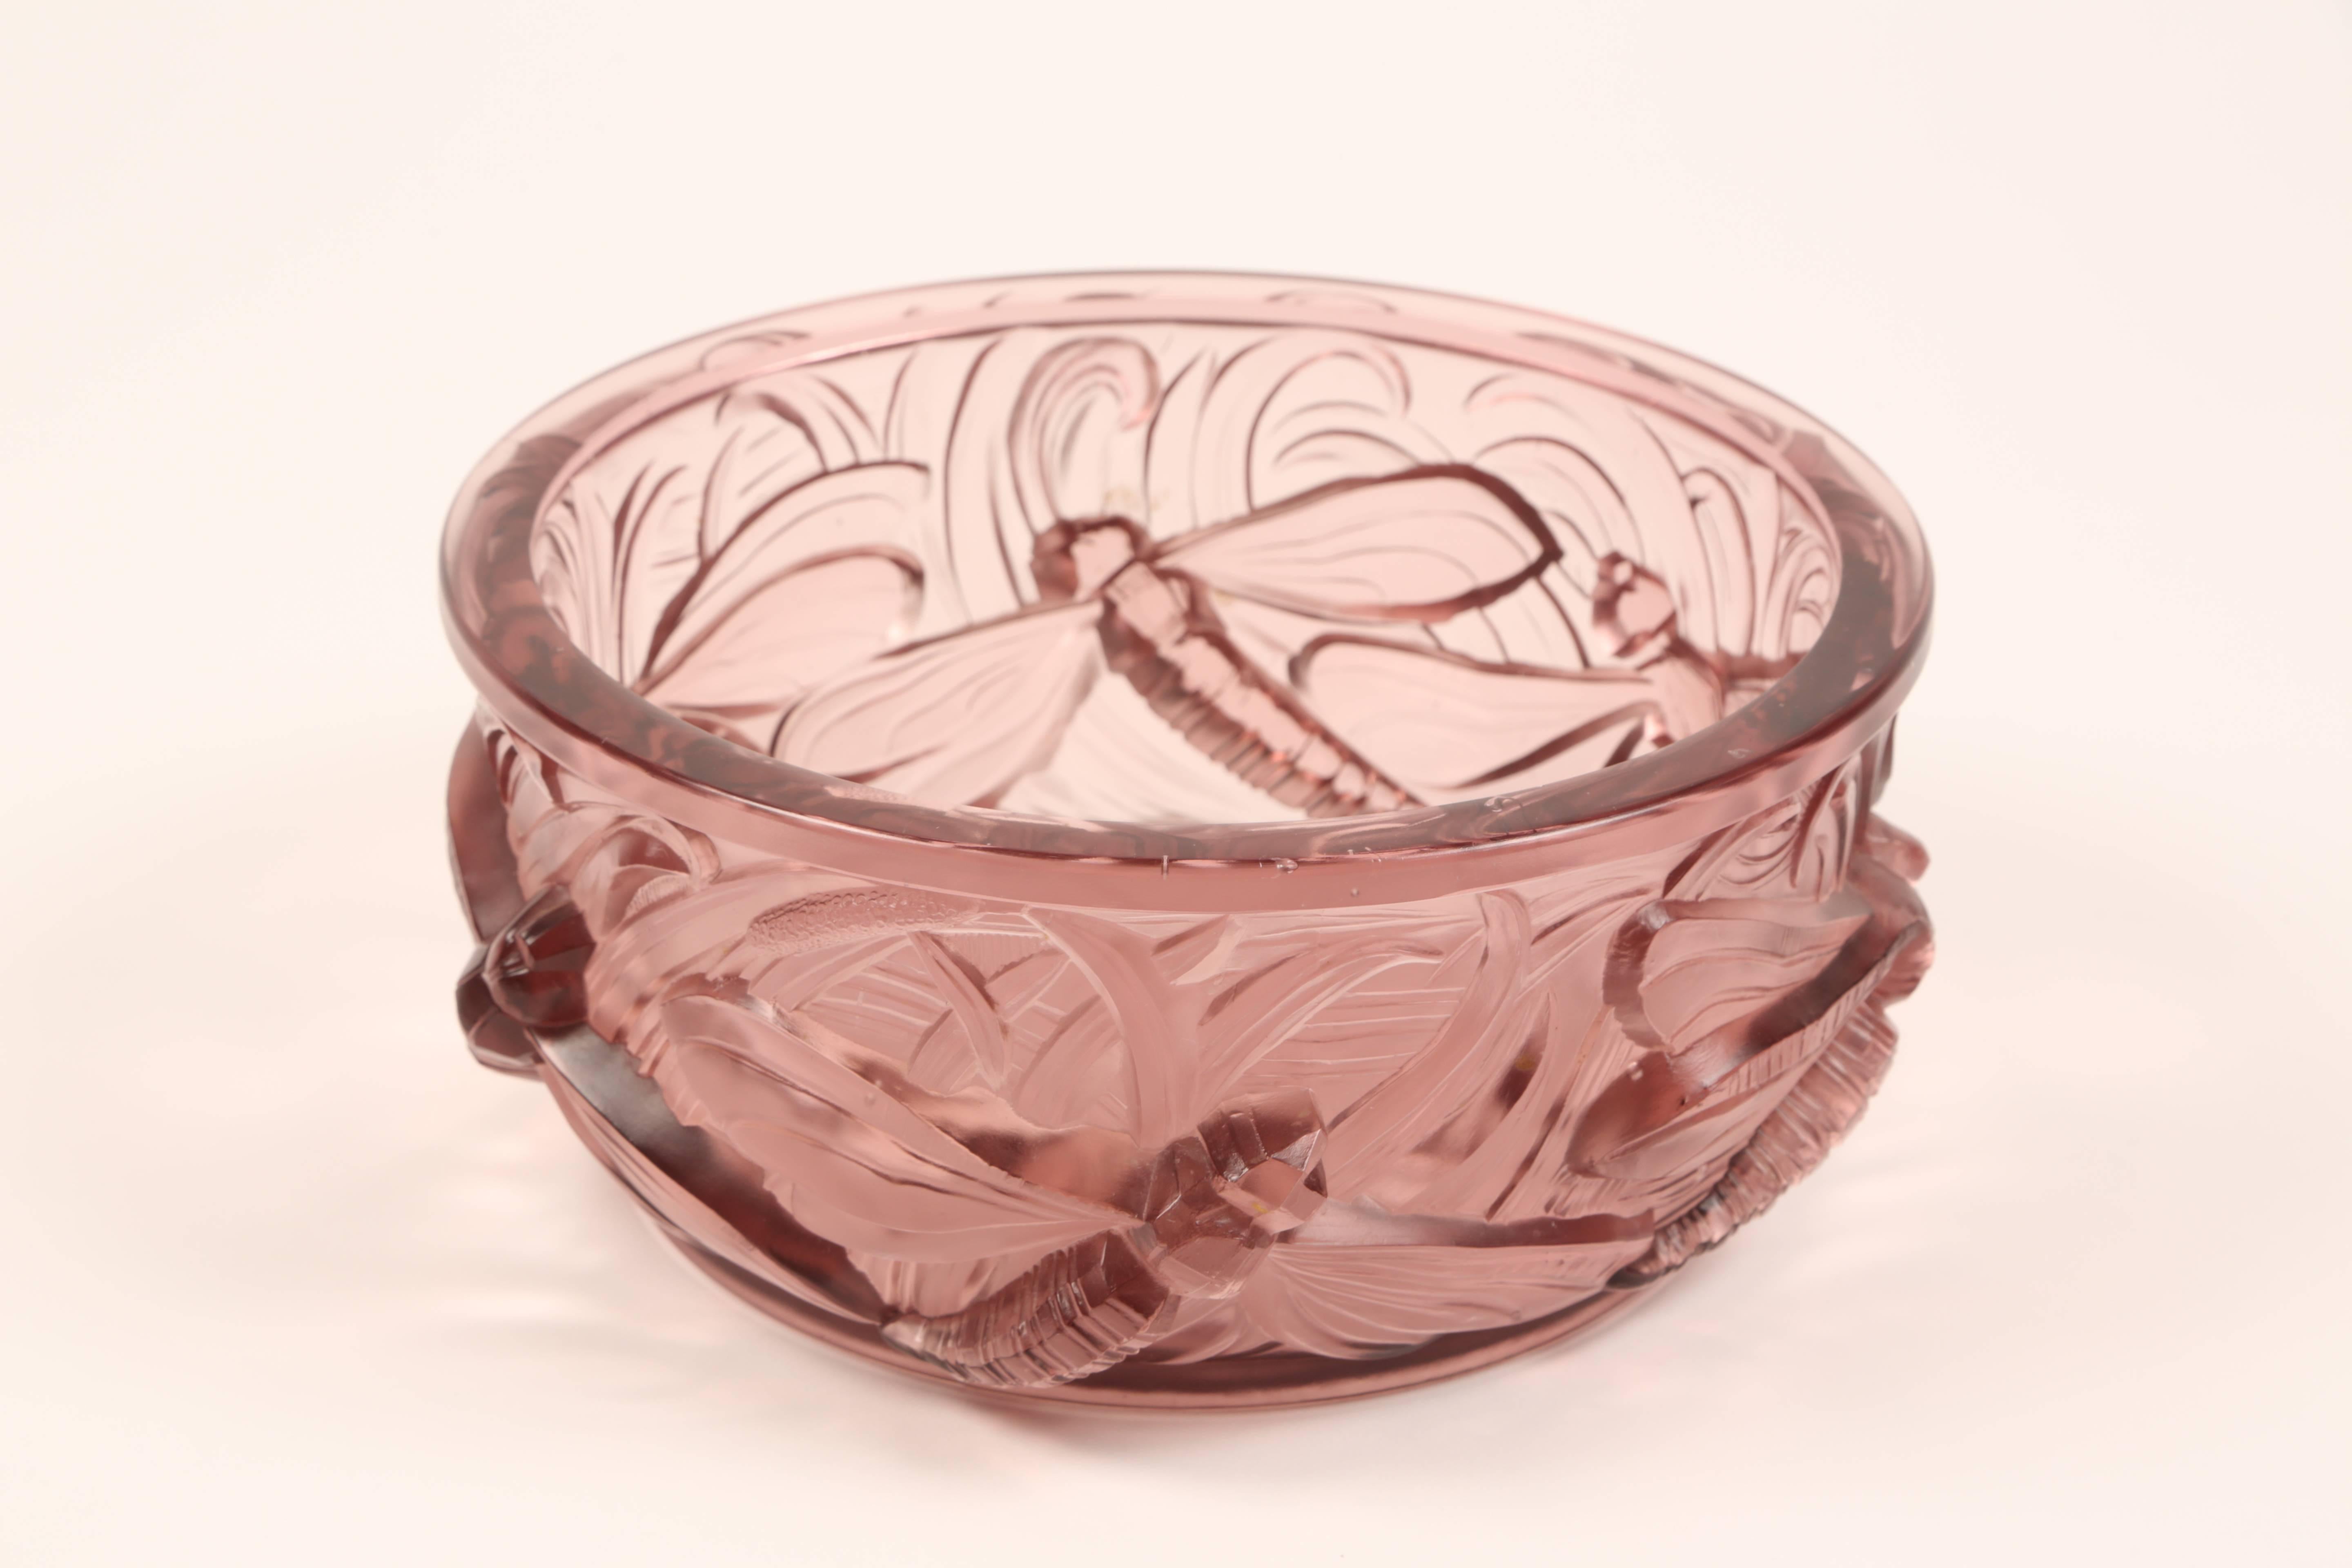 Molded Beautiful French Art Deco Dragonfly Motif Art Glass Bowl by Verlys